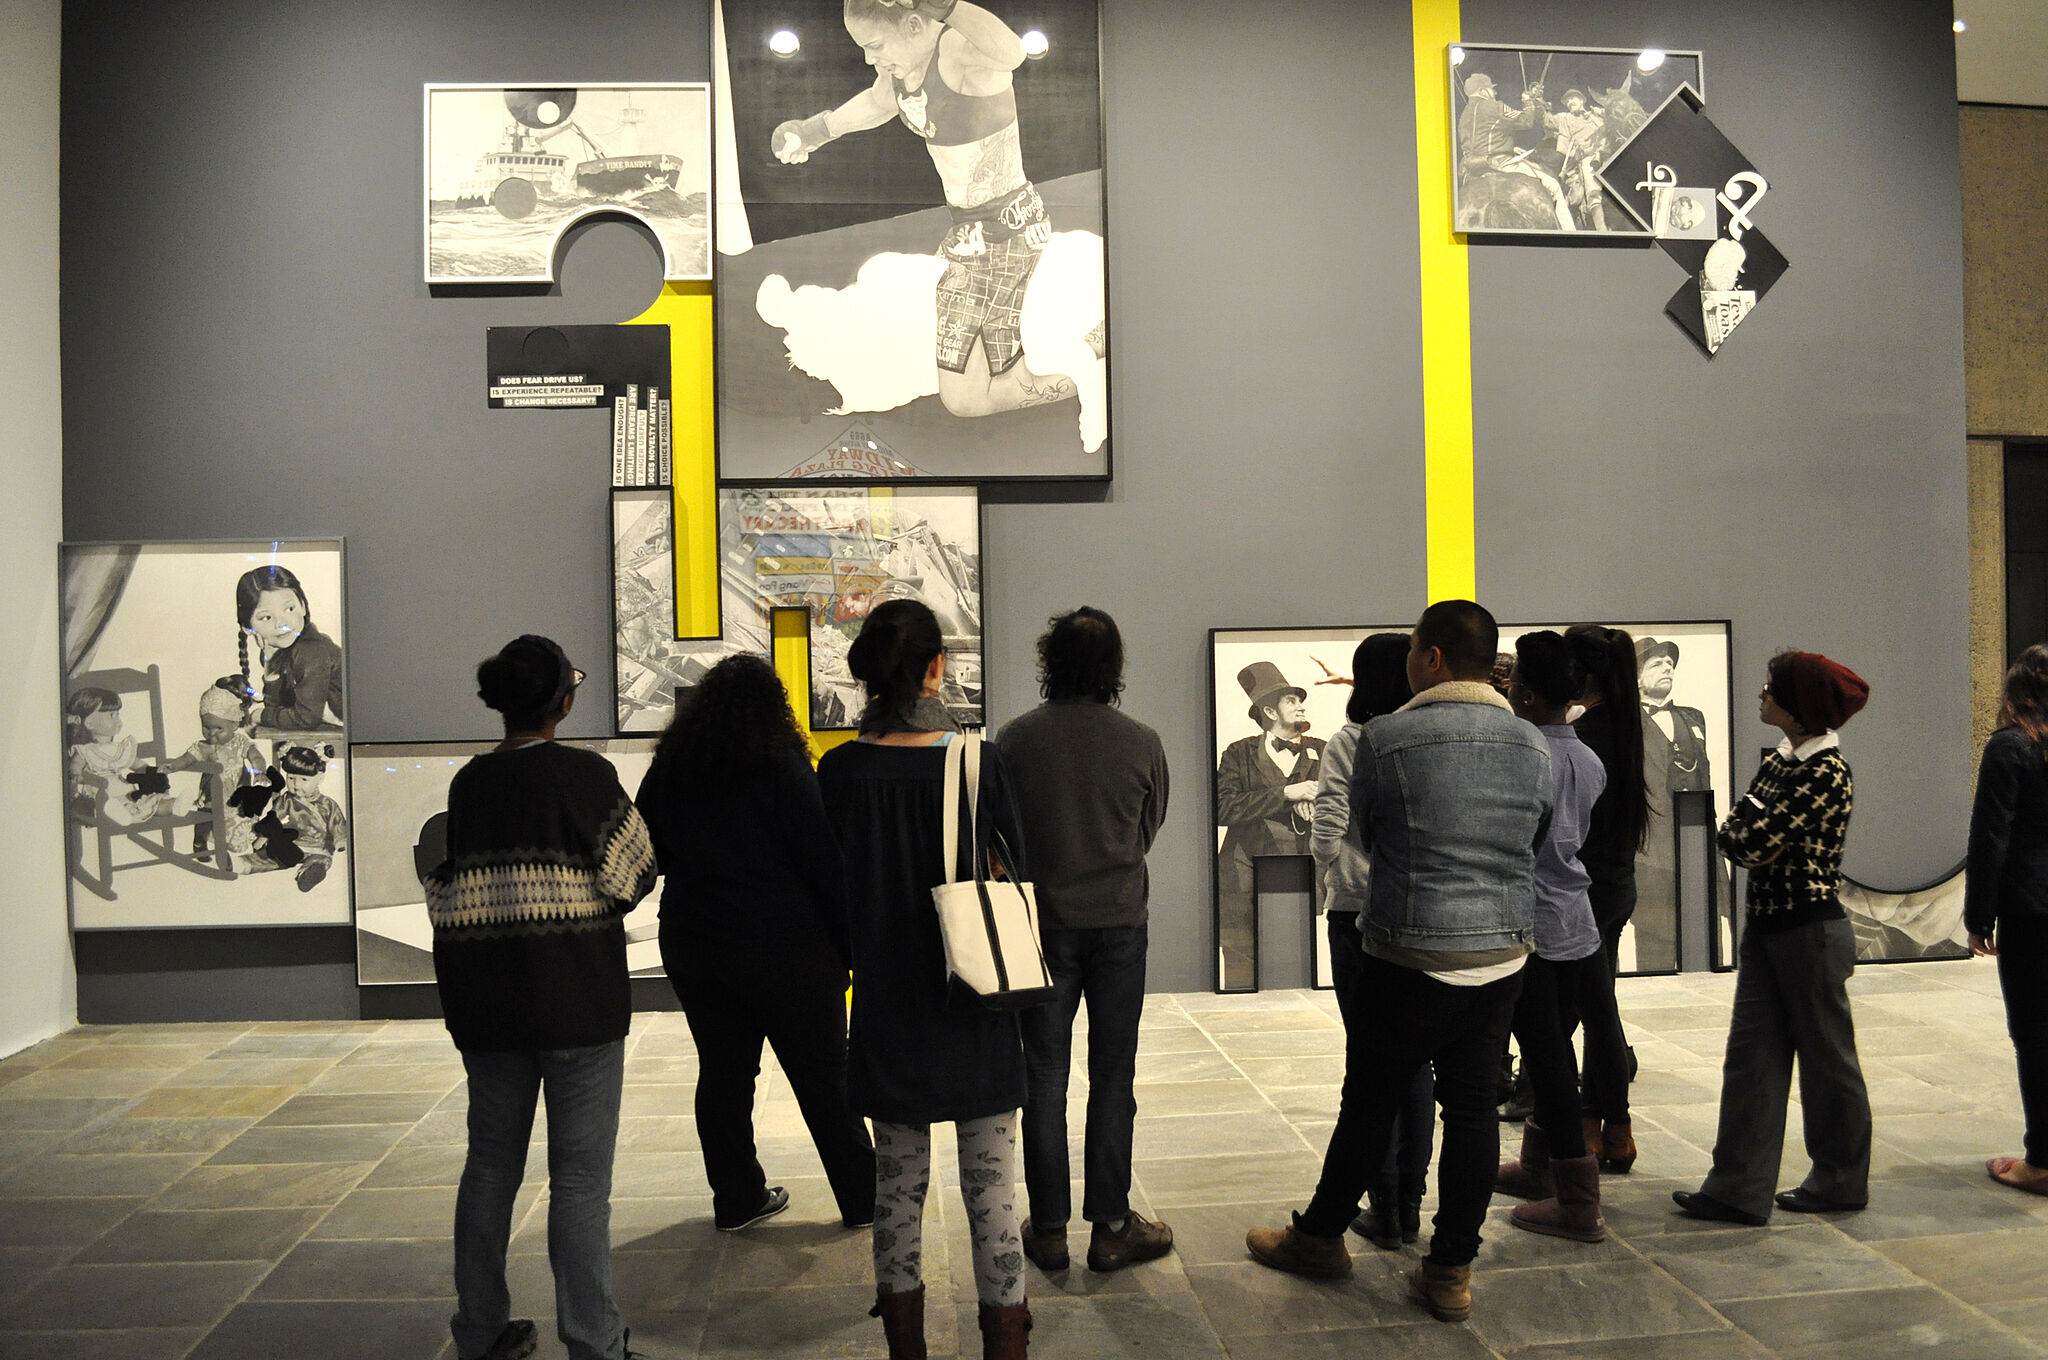 Students standing in a gallery space.